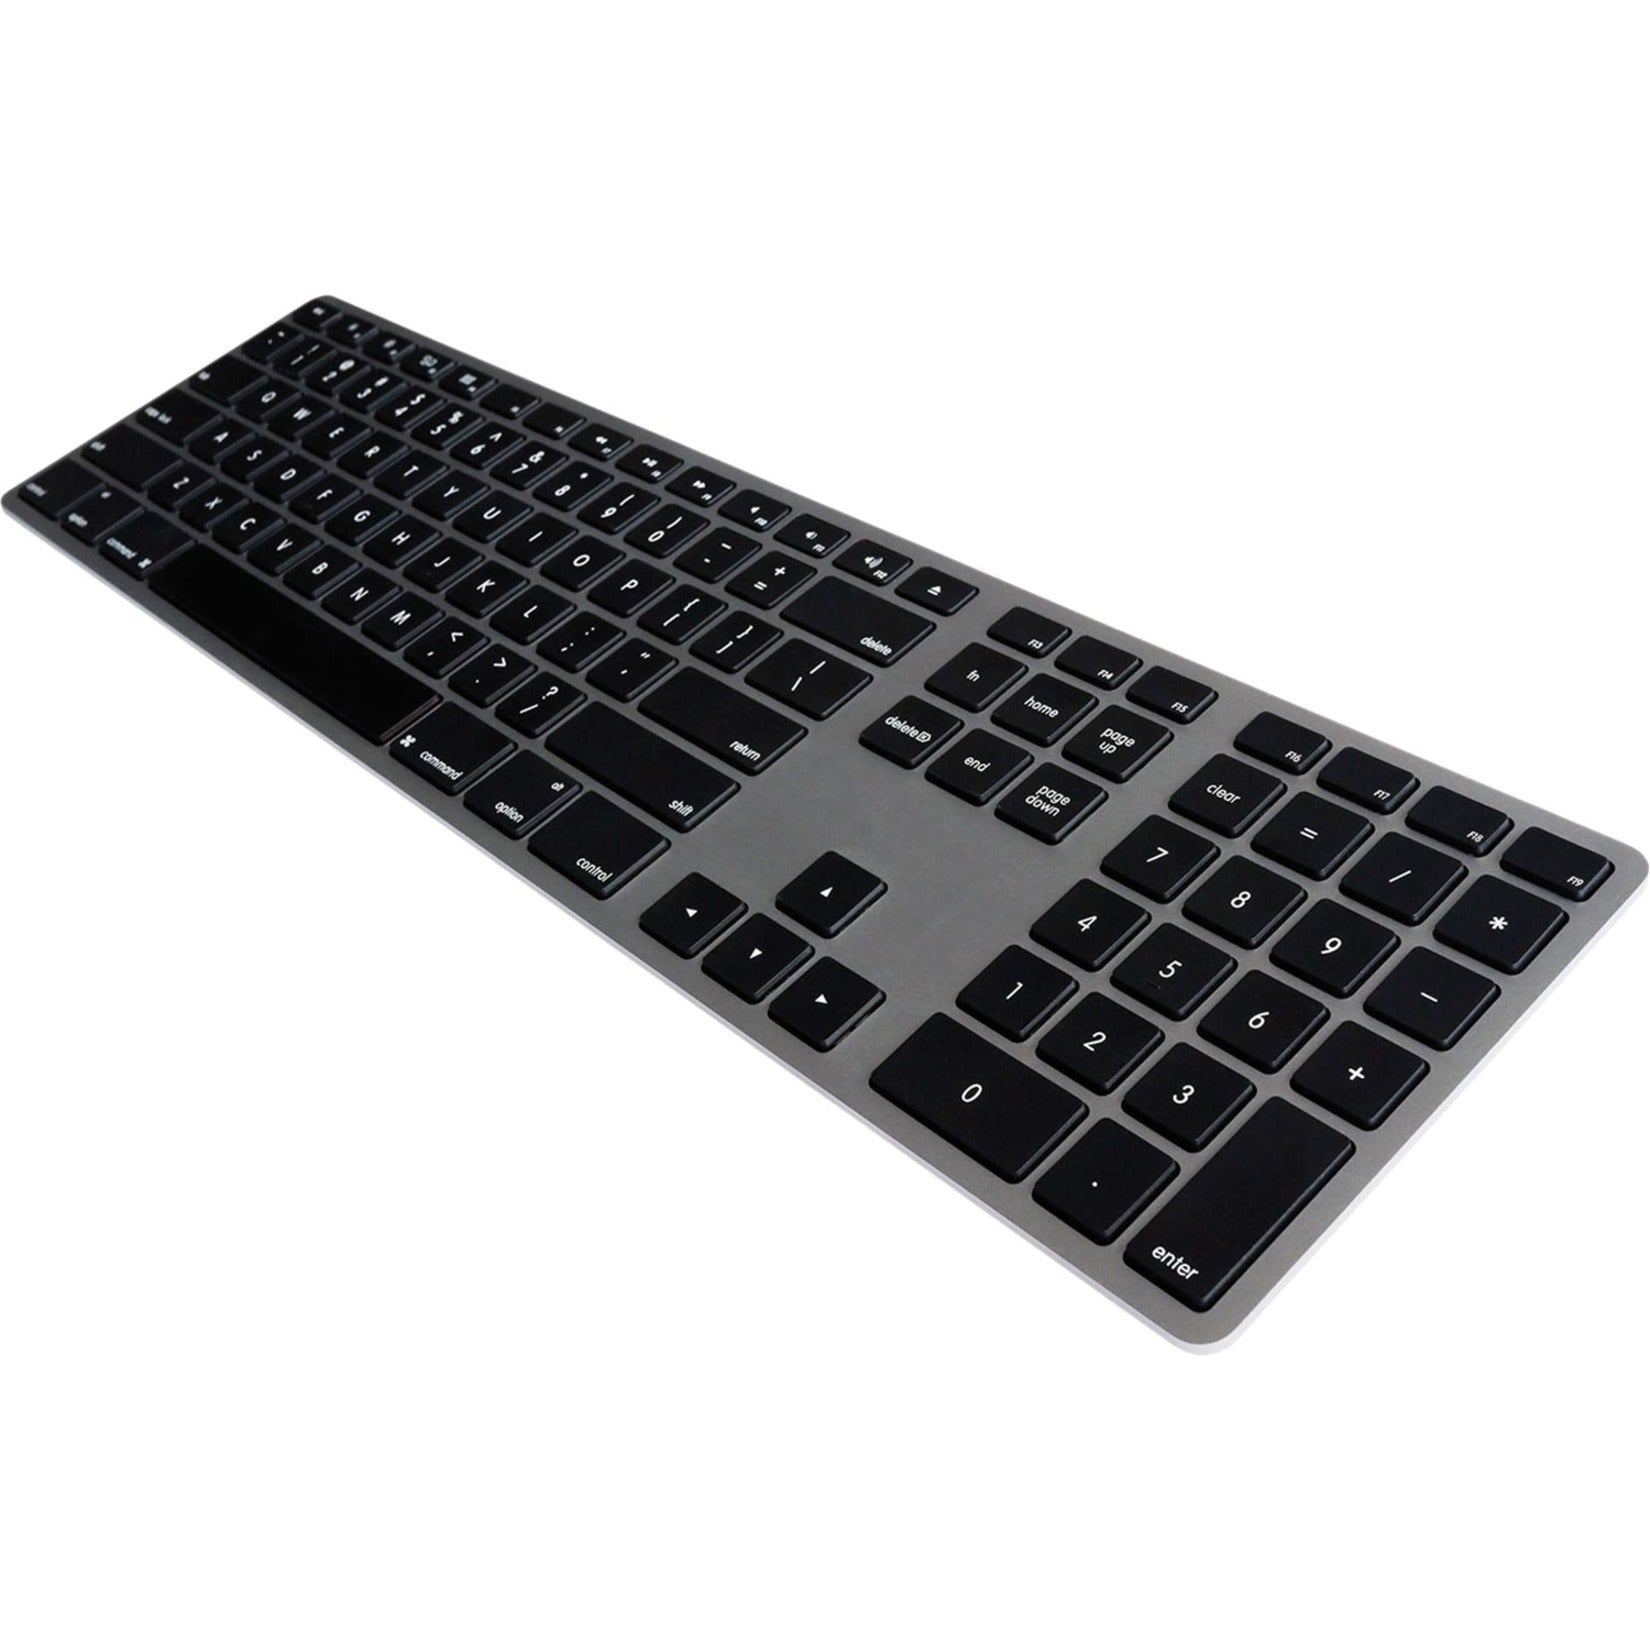 Matias FK318B Wired Aluminum Keyboard, Space Gray, Mac OS Compatible